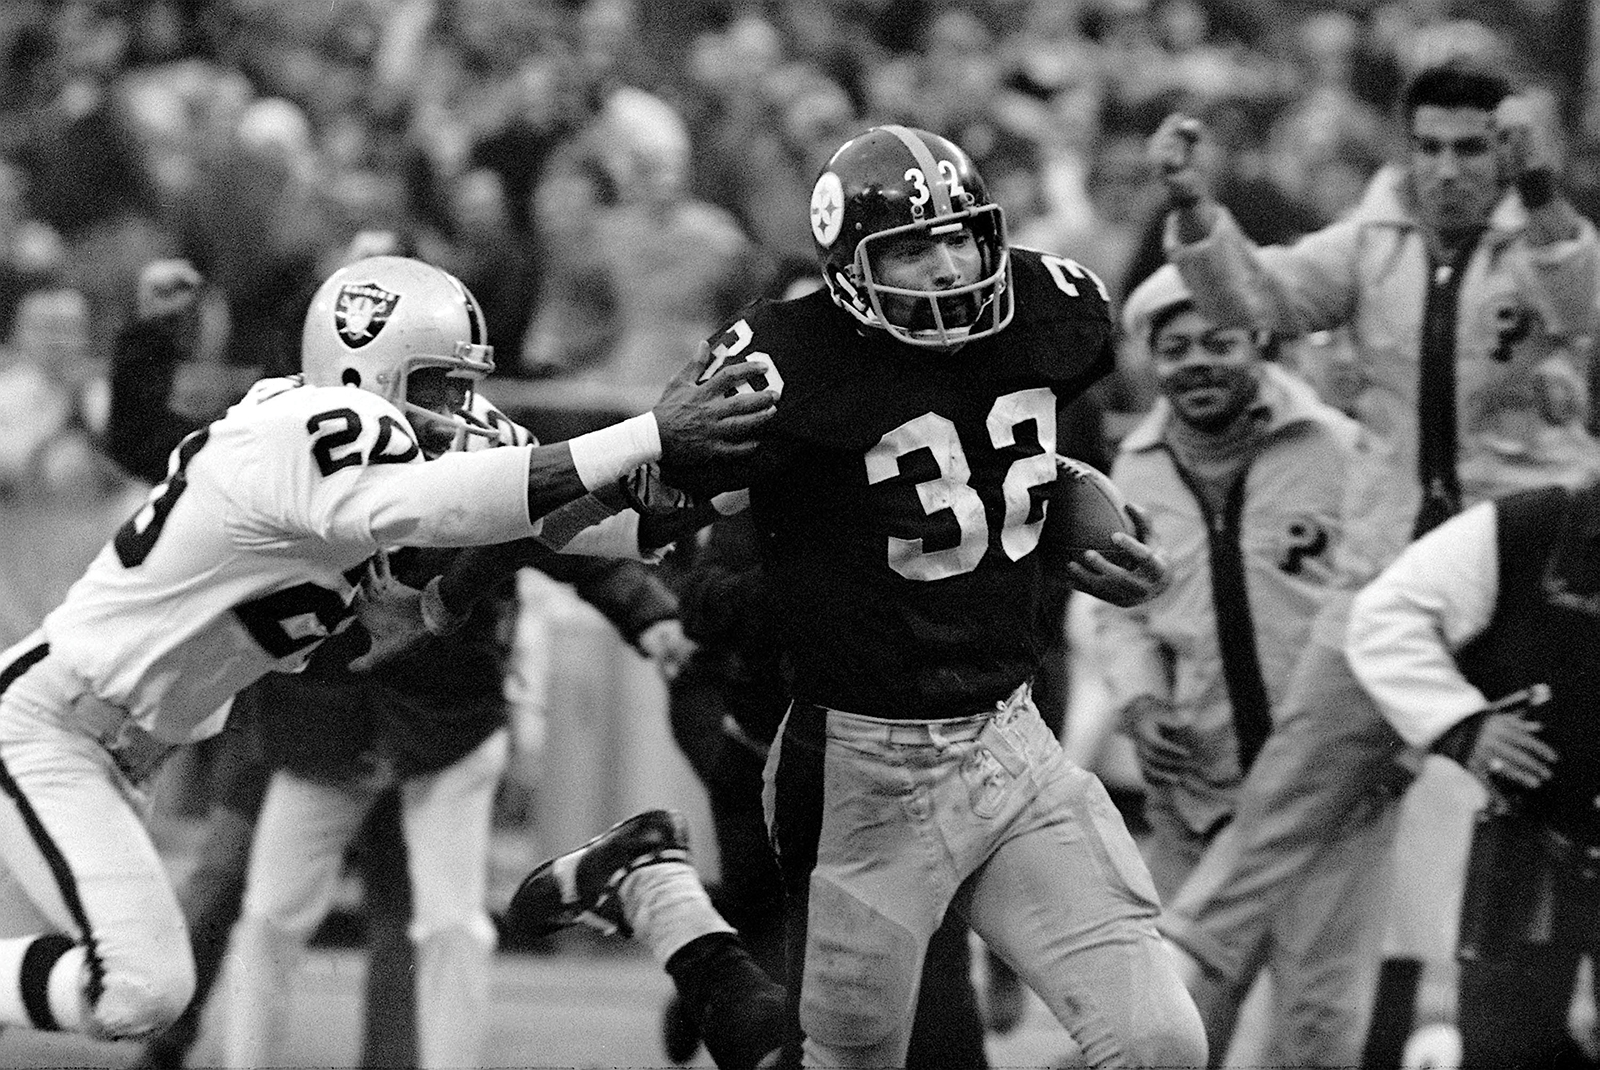 OTD: 'The Immaculate Reception', 12/23/72